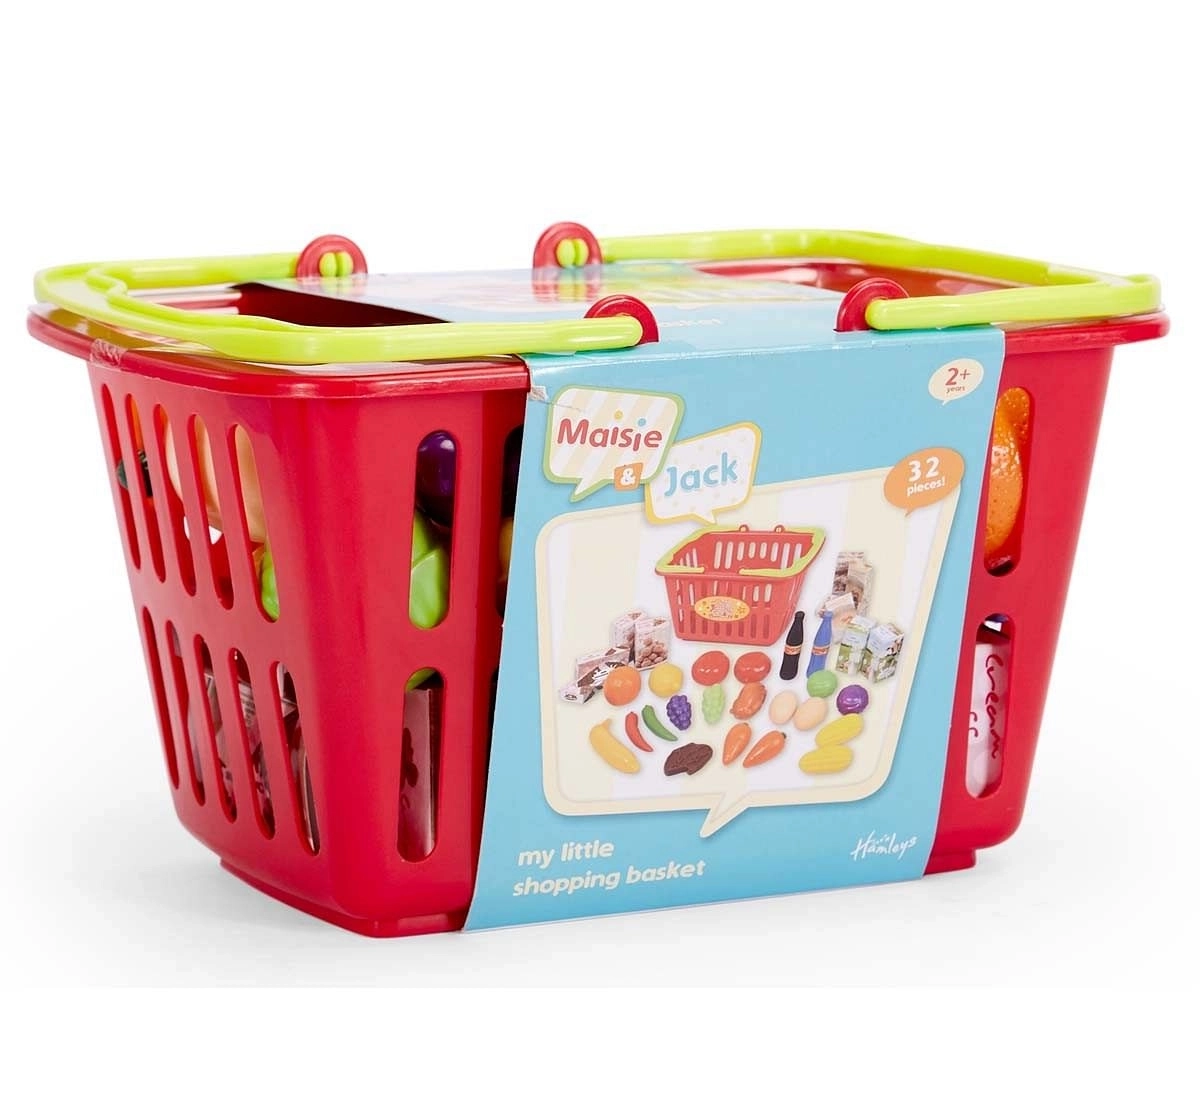 Hamleys Play Time My Shopping Basket - 32Pcs Supermarket & Food Playsets for Kids age 2Y+ 